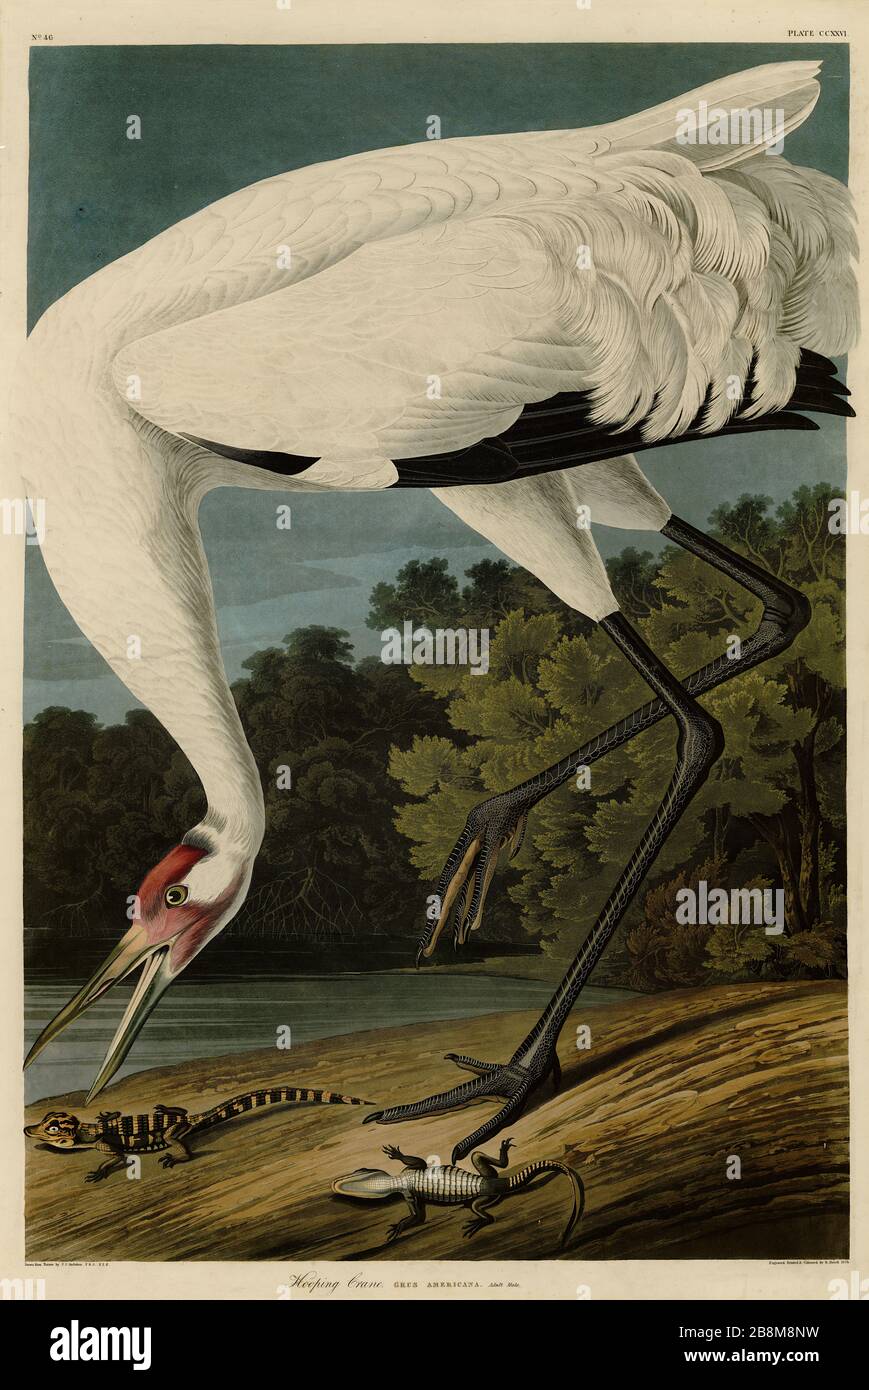 Plate 226 Hooping Crane (Whooping Crane) from The Birds of America folio (1827–1839) by John James Audubon - Very high resolution quality edited image Stock Photo